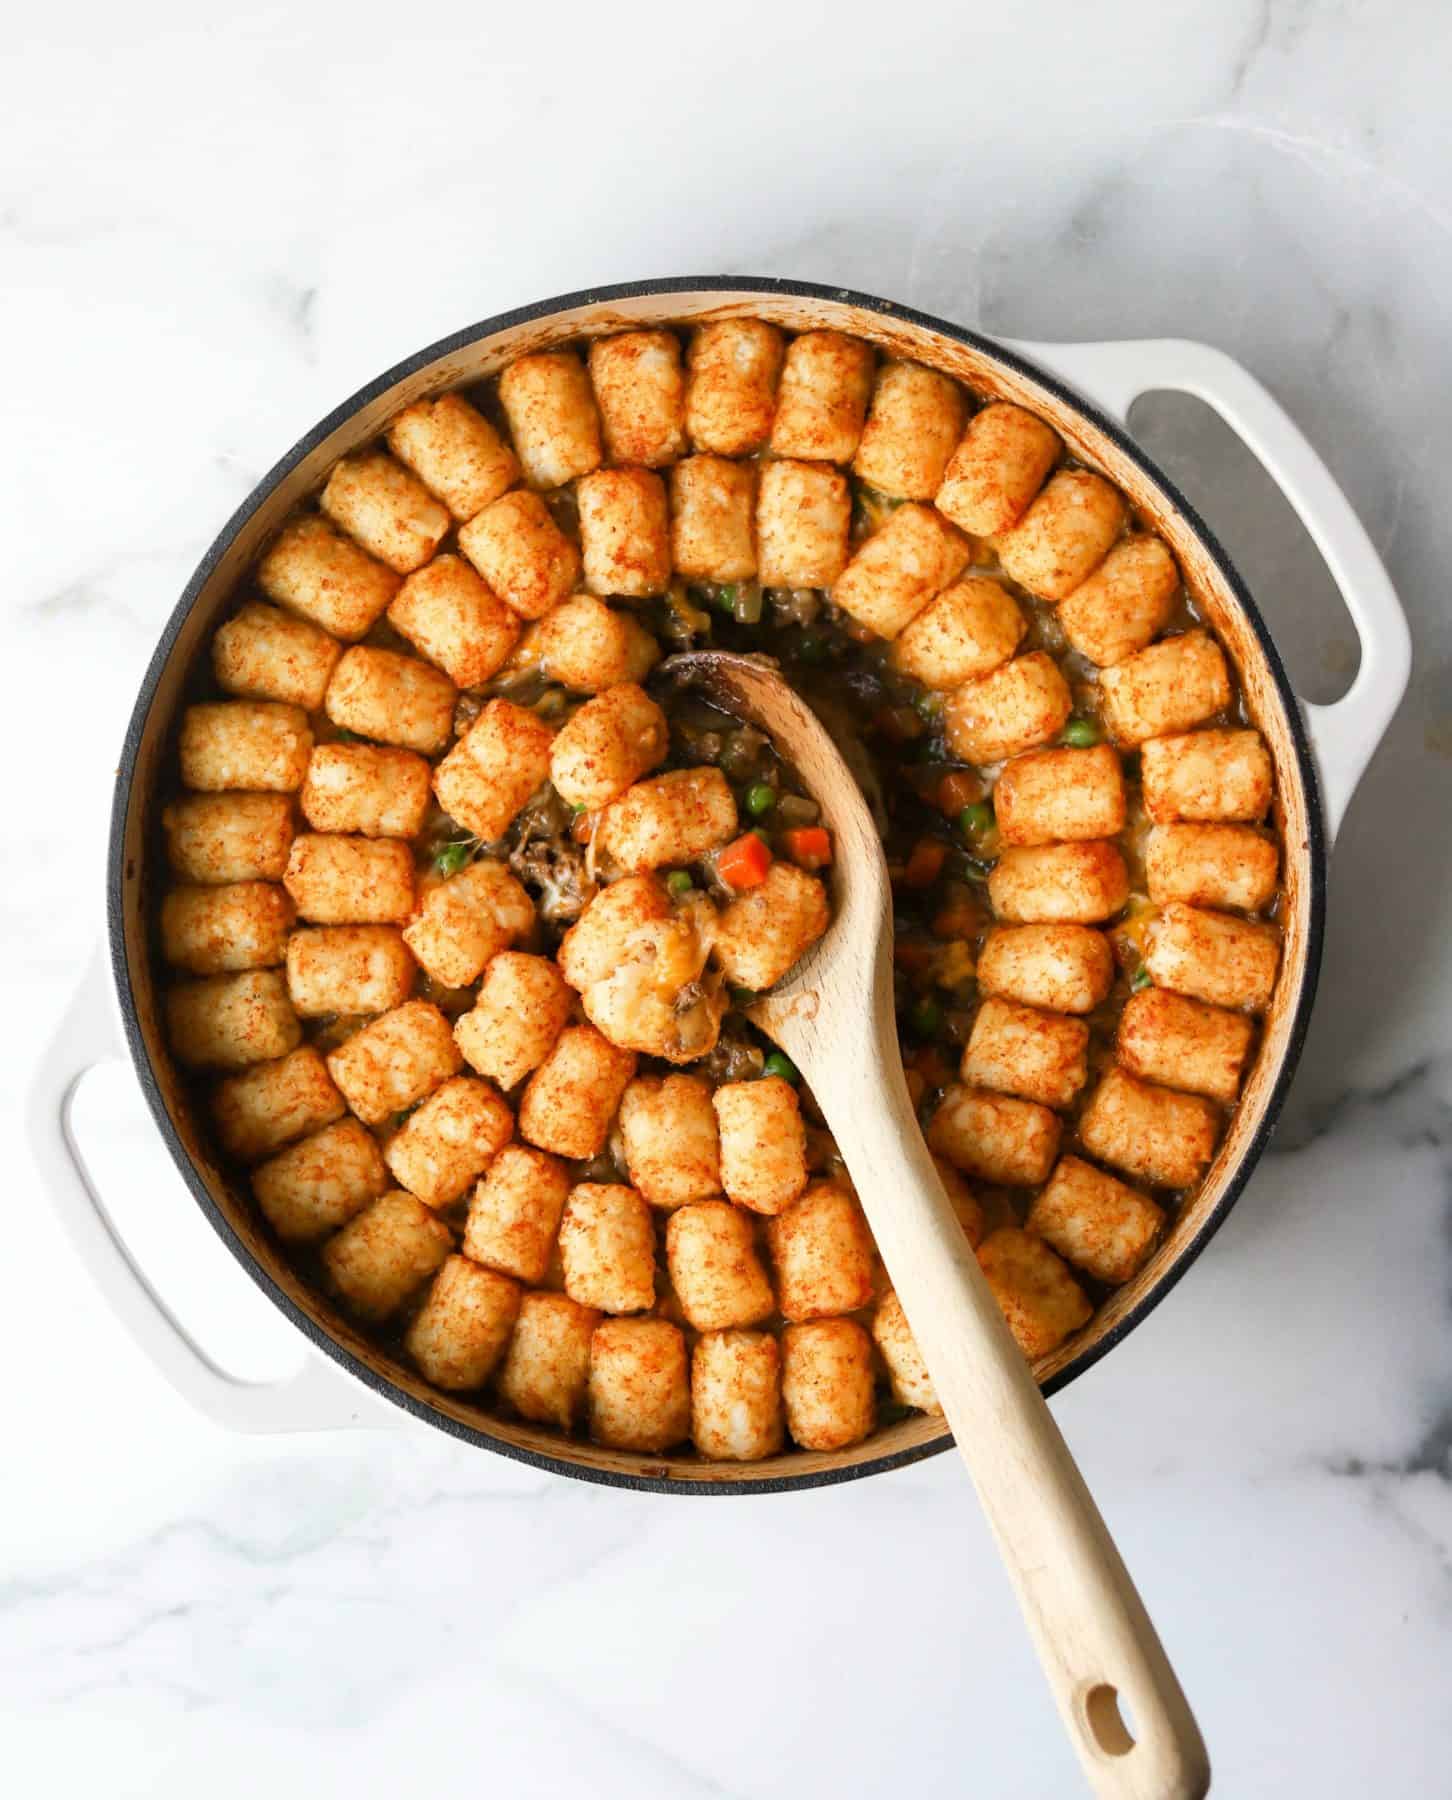 Tater tot casserole in white dish (an example of a healthy one pot meal)